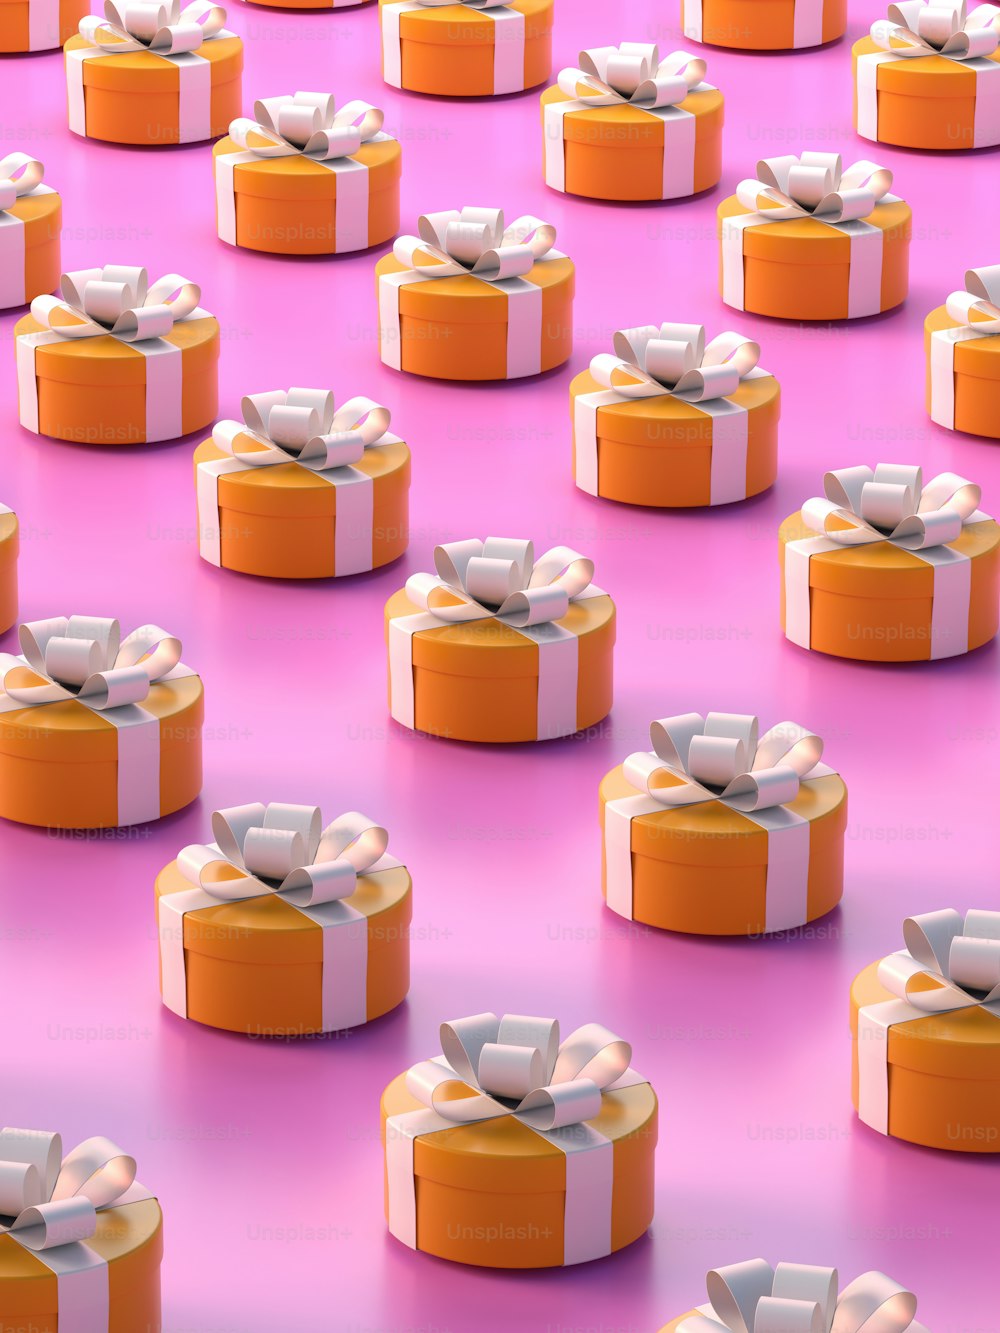 a group of orange and white boxes with bows